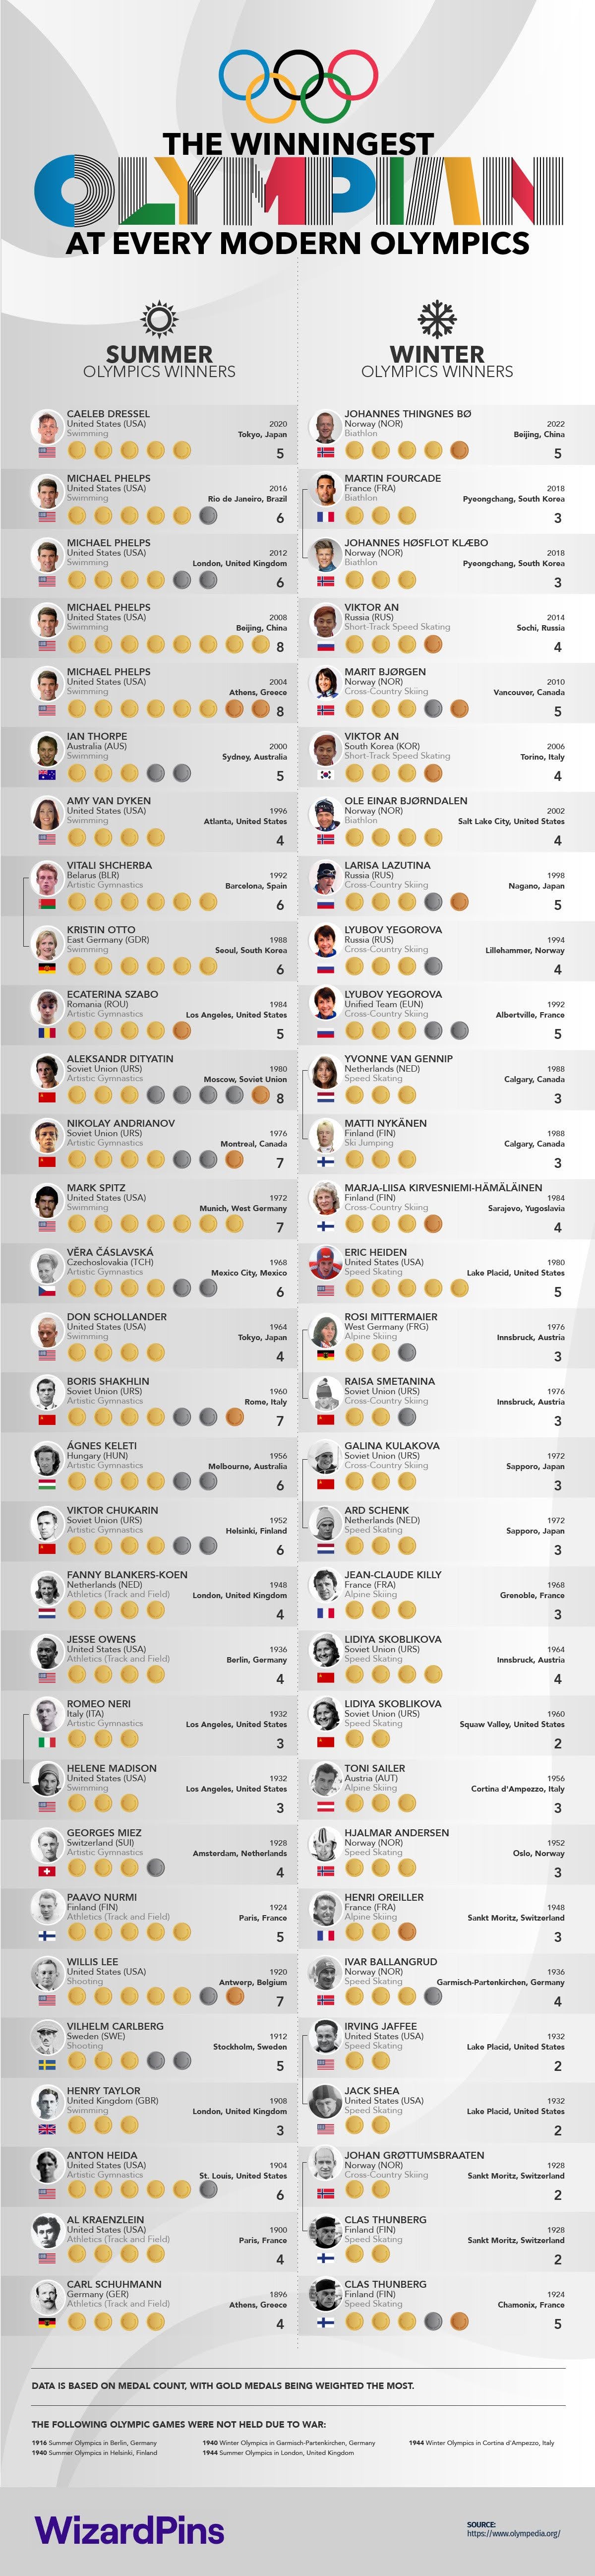 The Winningest Olympian at Every Modern Olympics by Medal Count #infographic